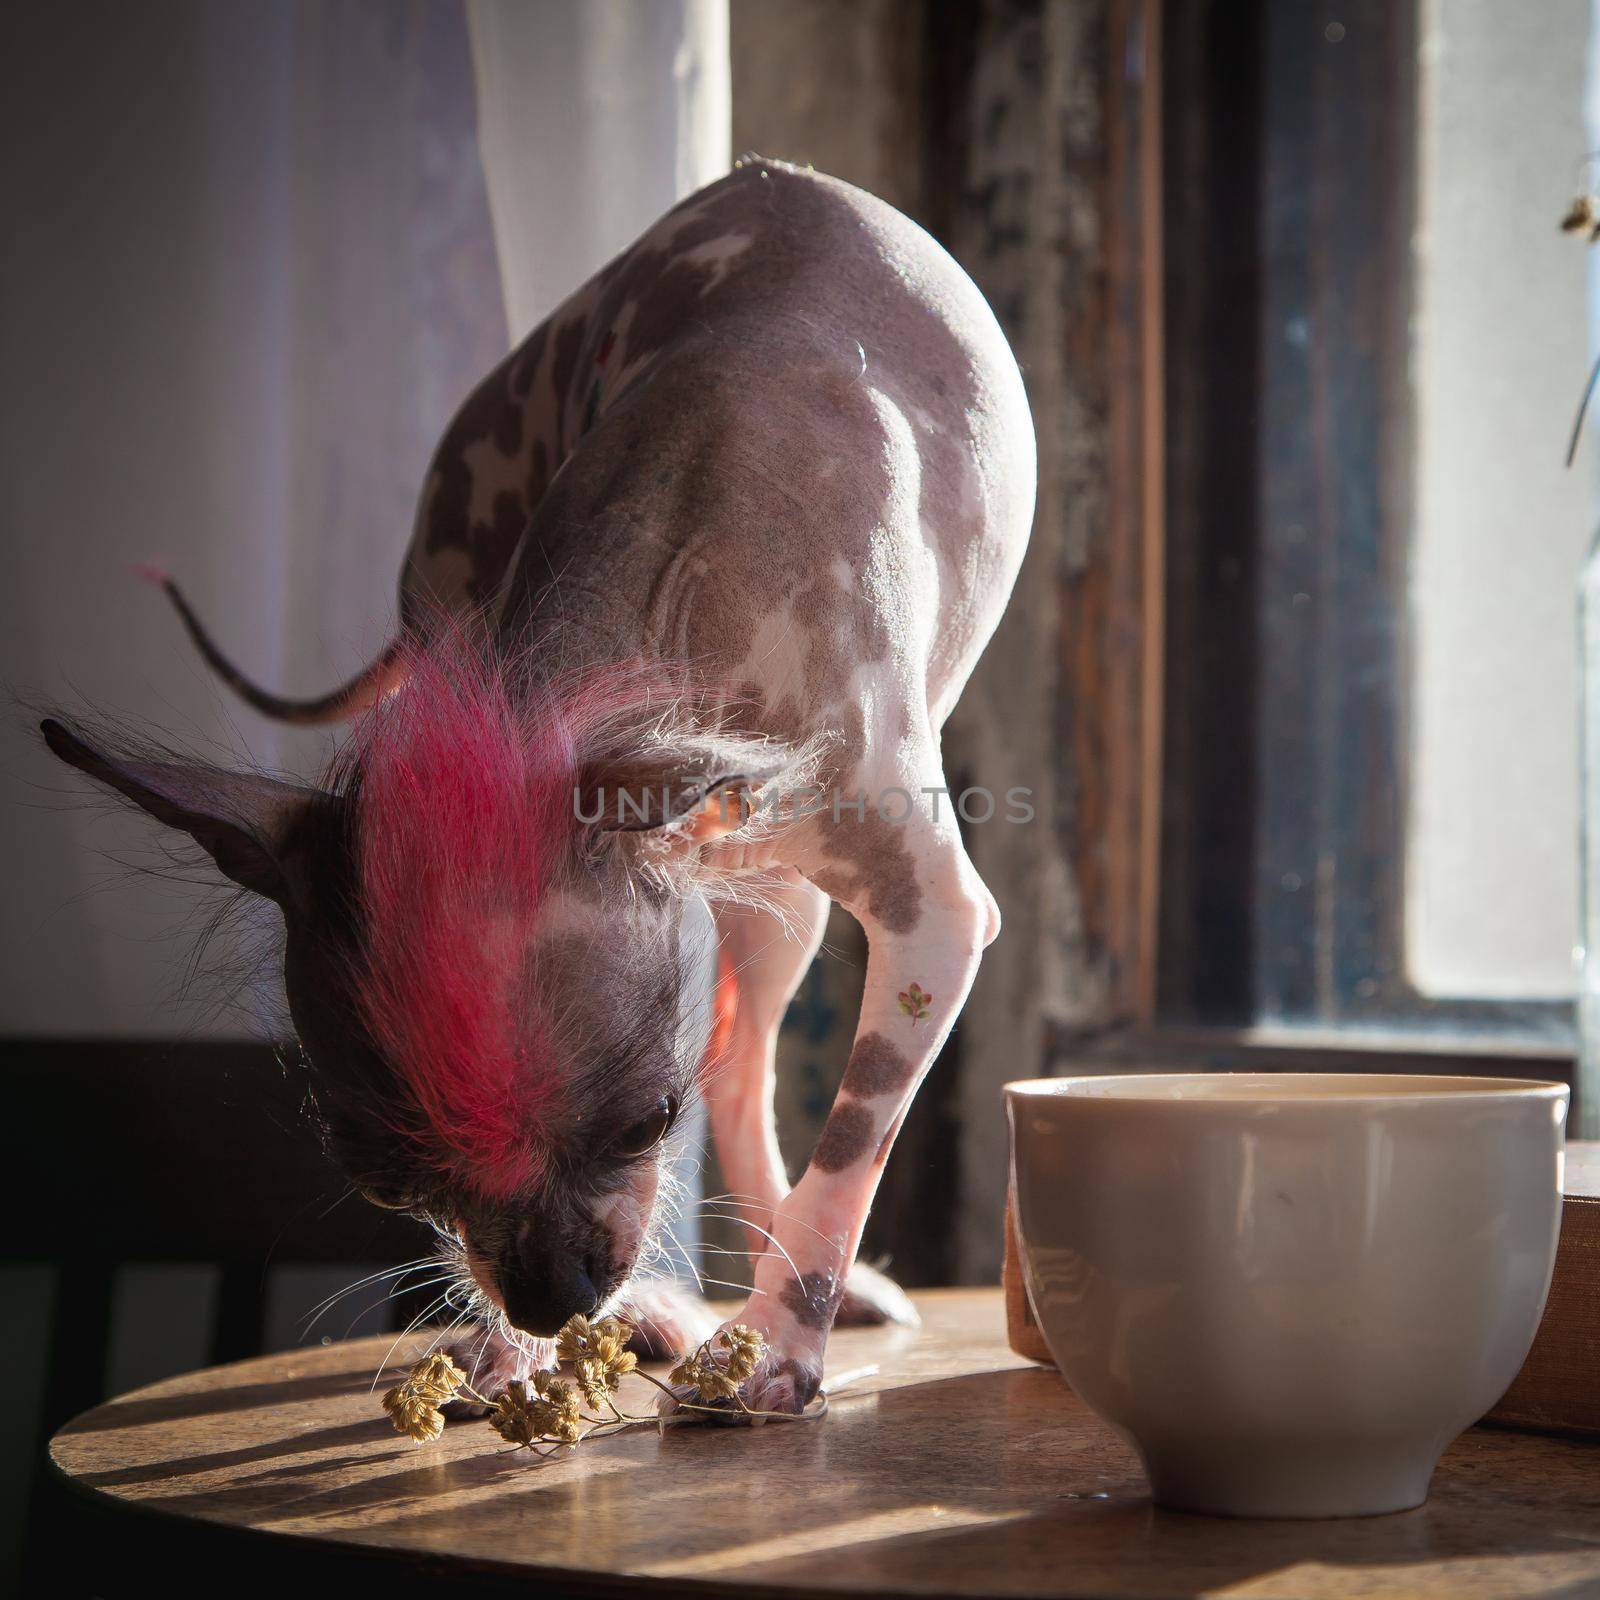 Punk style peruvian hairless and chihuahua mix dog with tattoo on table